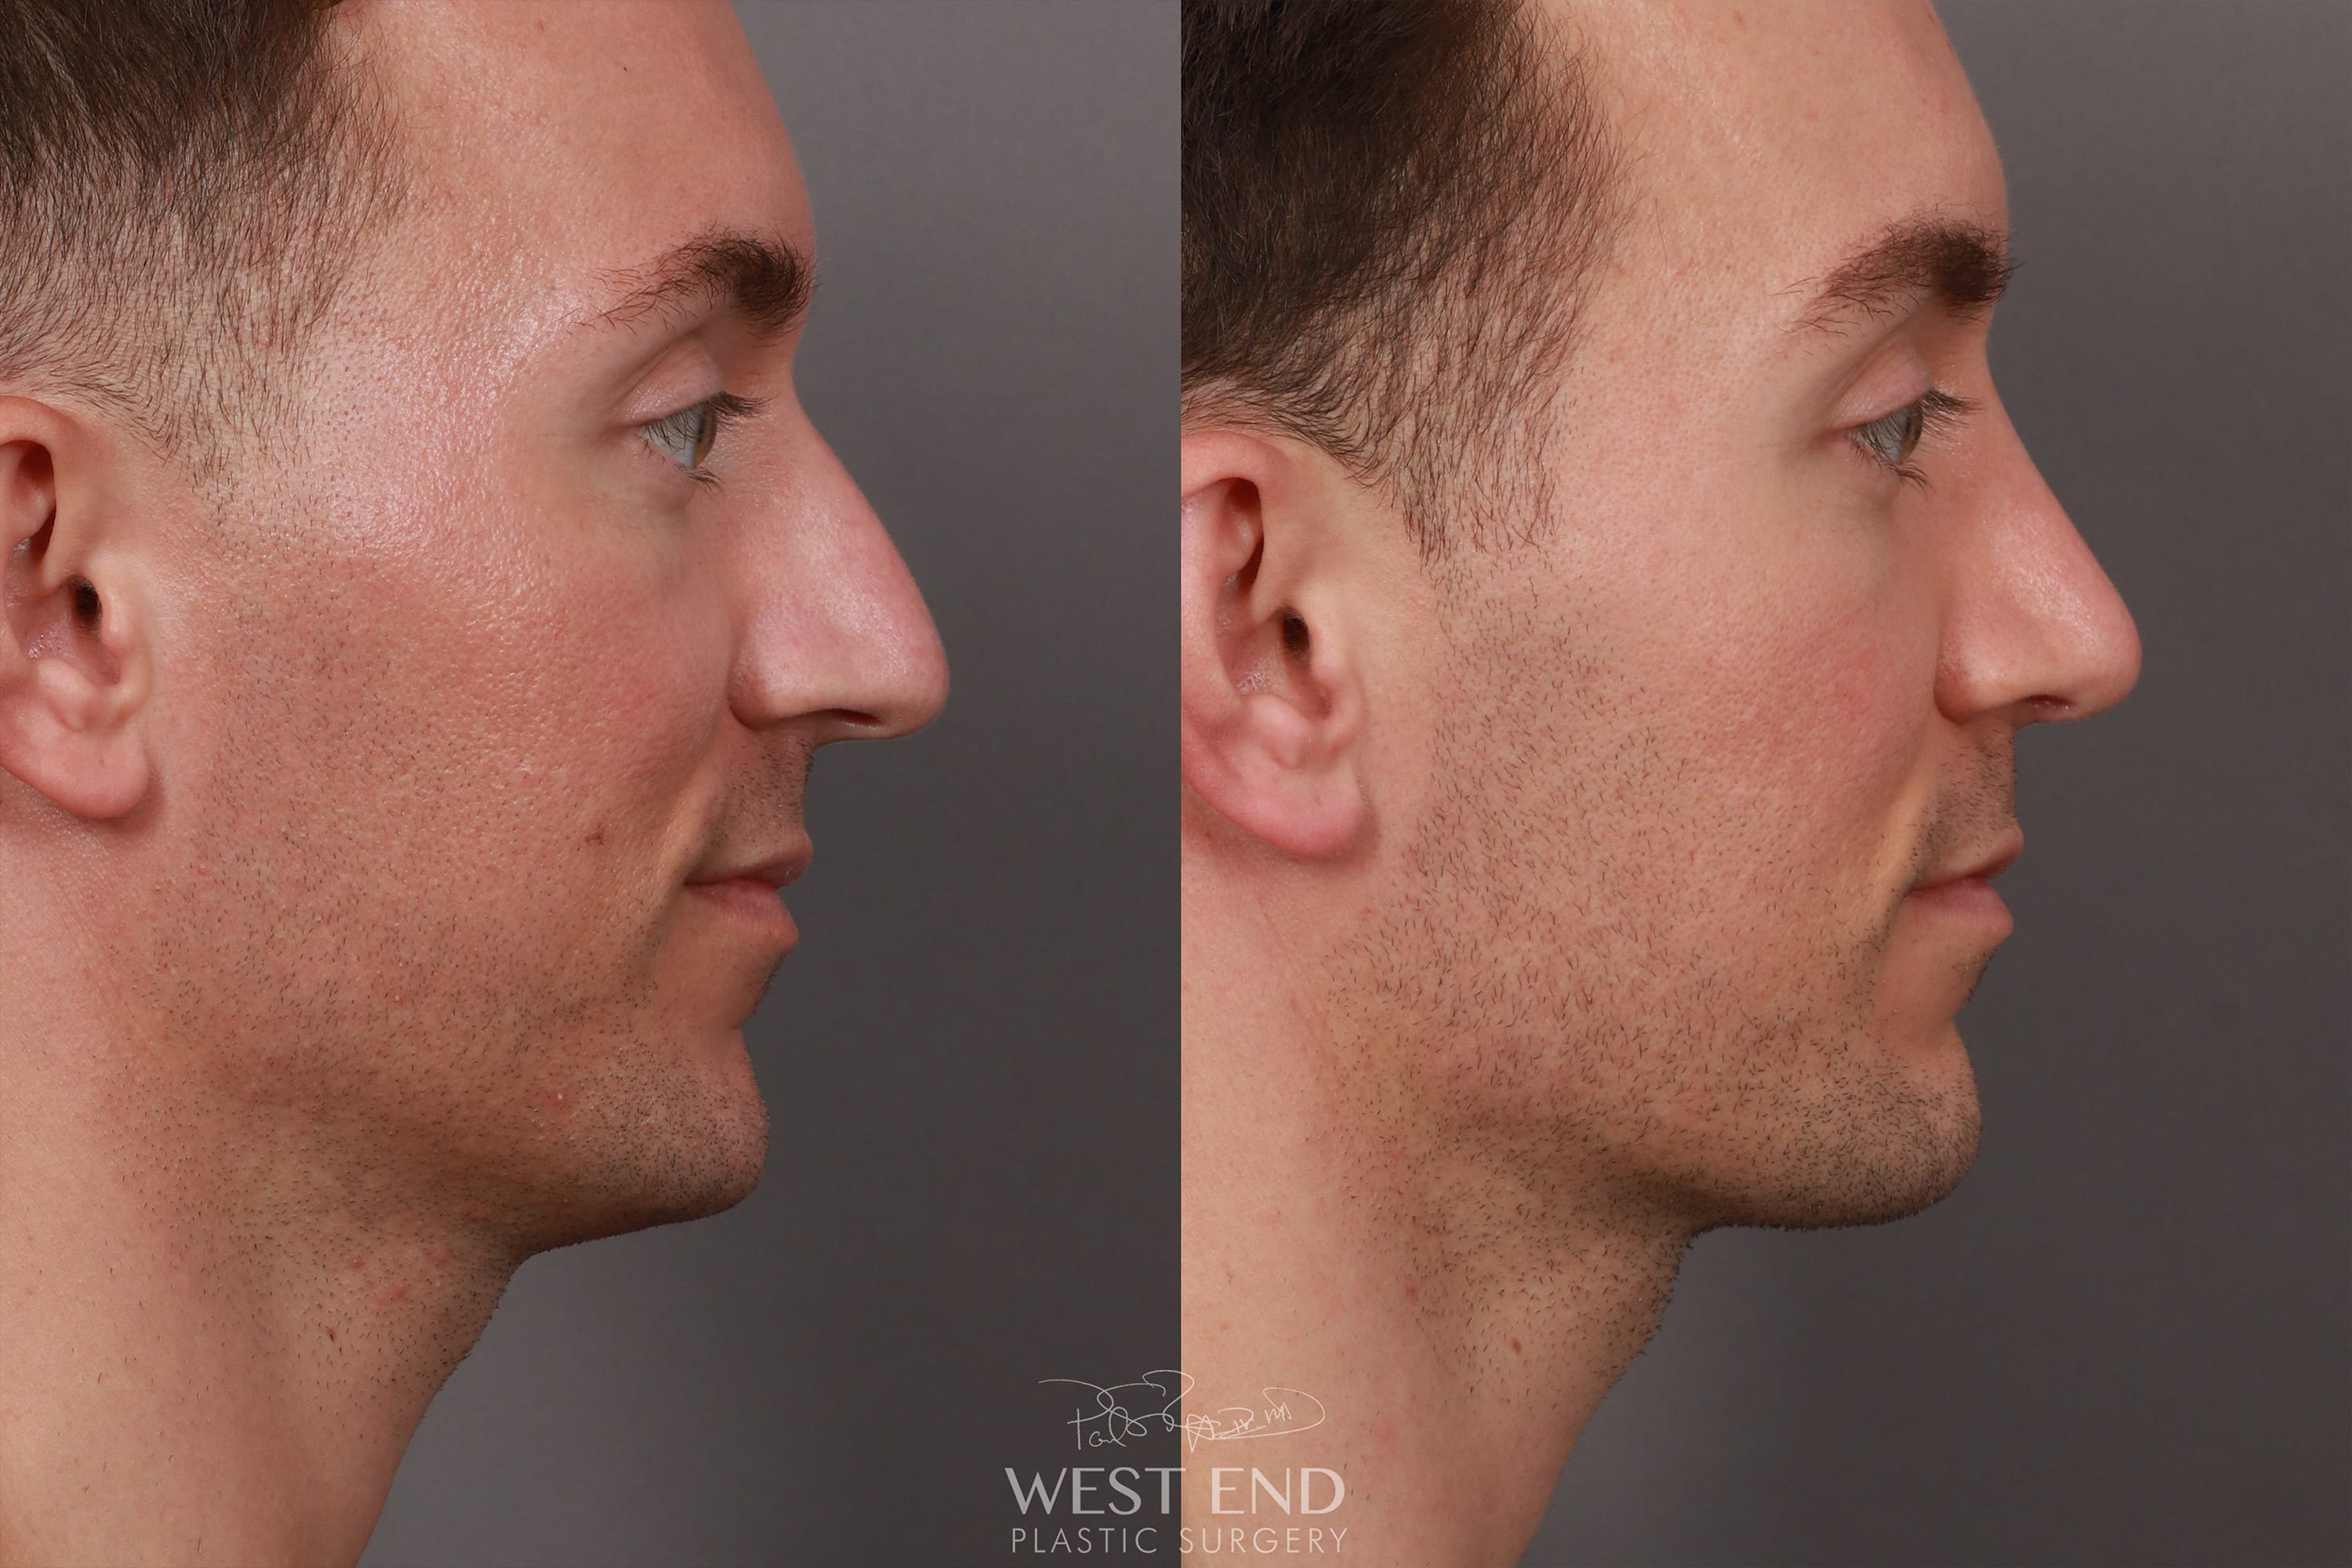 Structural Rhinoplasty (3 Months Post-Op)